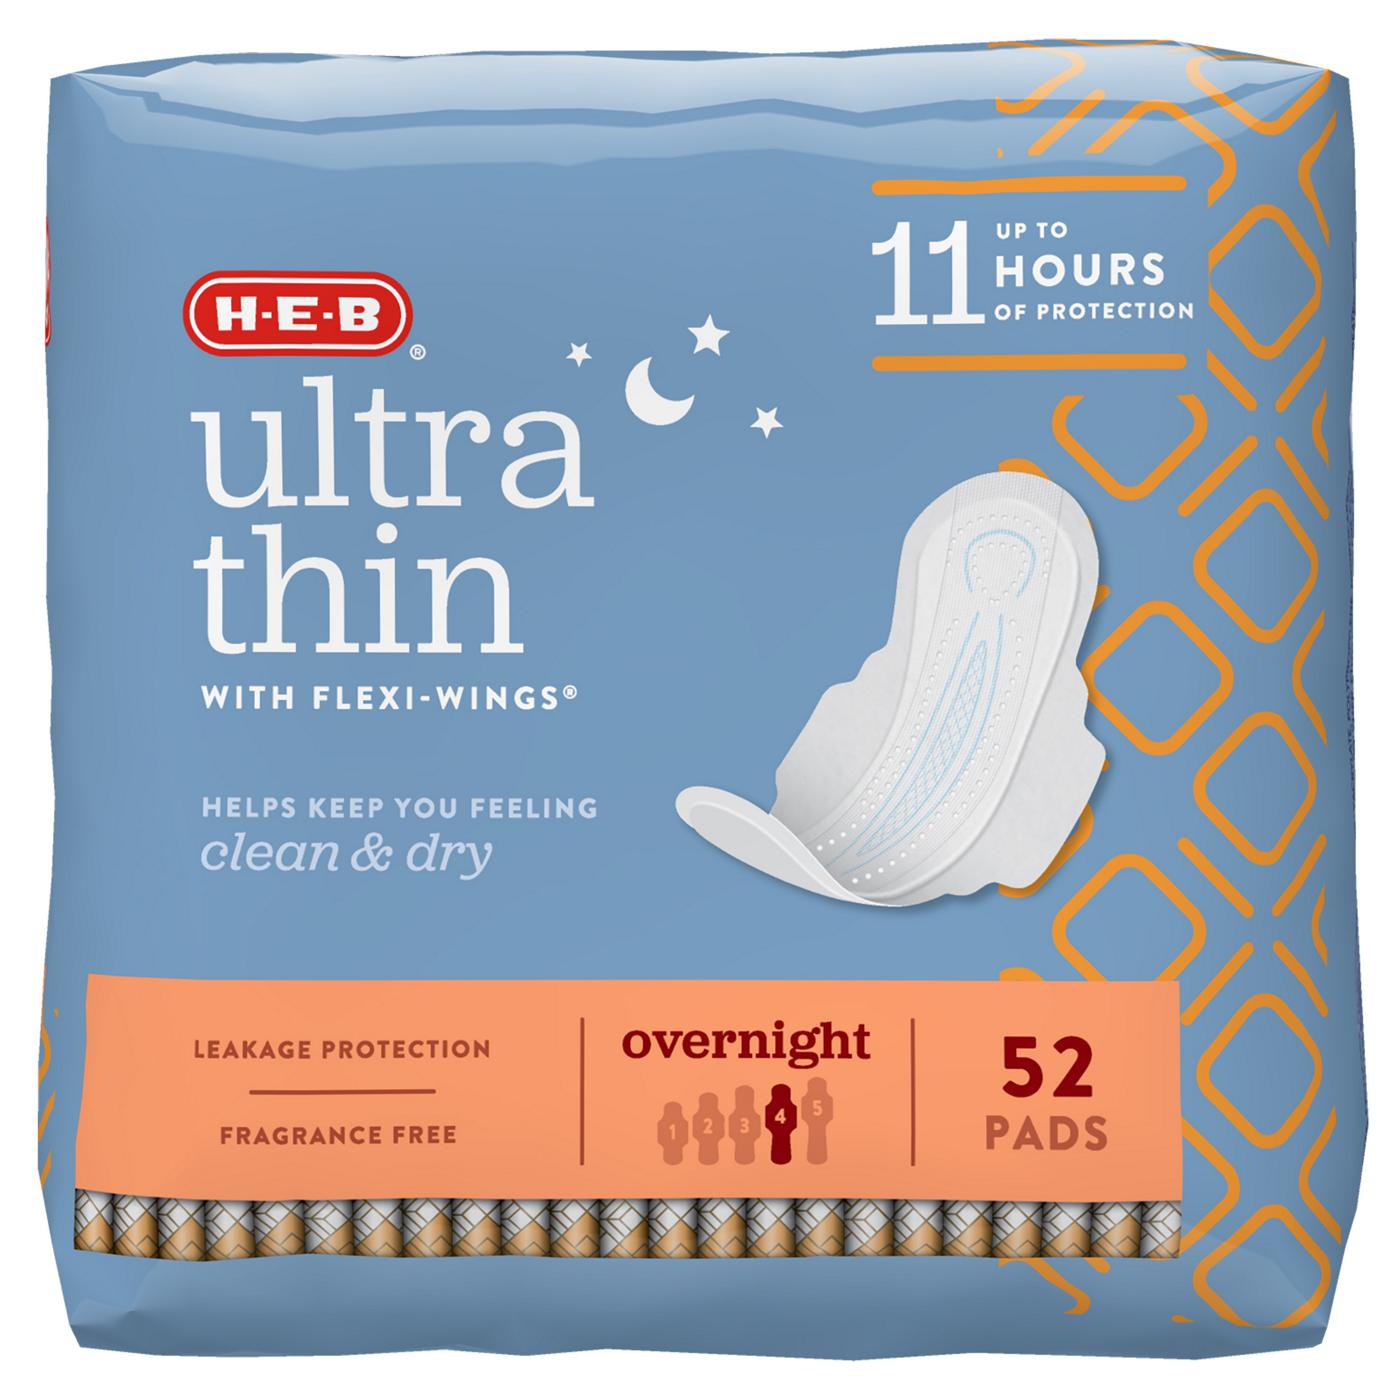 H-E-B Ultra Thin with Flexi-Wings Overnight Pads - Shop Pads & Liners at  H-E-B